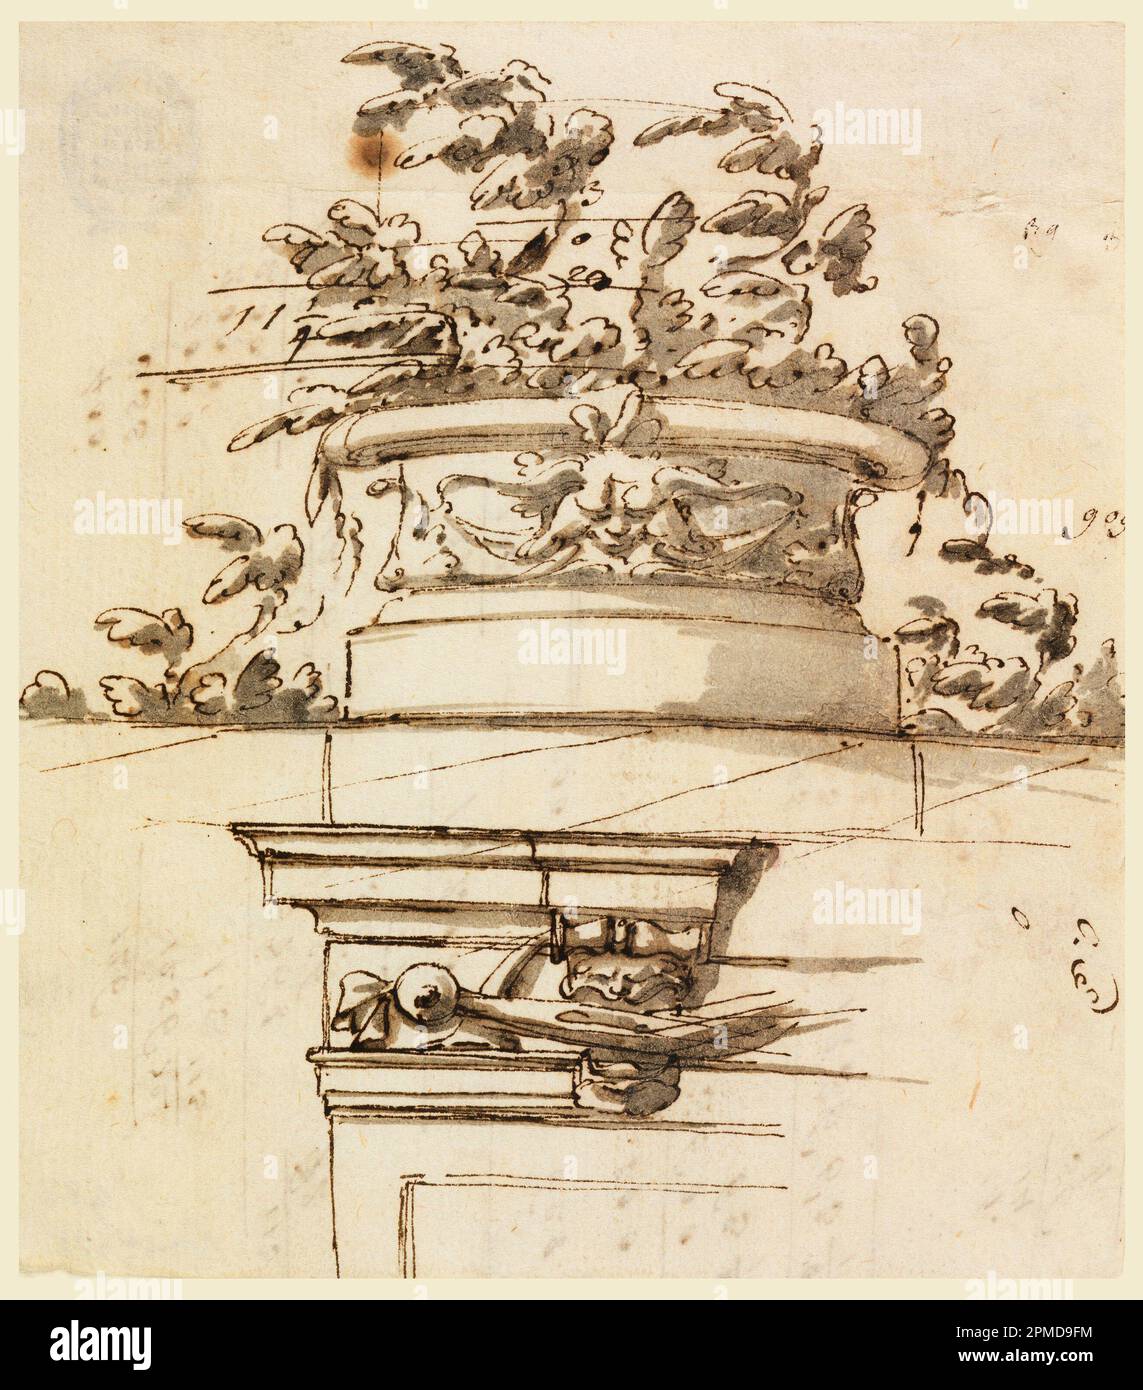 Drawing, Architectural Ornaments; Possibly by Carlo Marchionni (Italian, 1702–1786), Filippo Marchionni (Italian, 1732–1805); Italy; pen and black ink, brush and gray watercolor on cream laid paper; 13 × 11.6 cm (5 1/8 × 4 9/16 in.) Mat: 56 × 40.7 cm (22 1/16 in. × 16 in.) Stock Photo